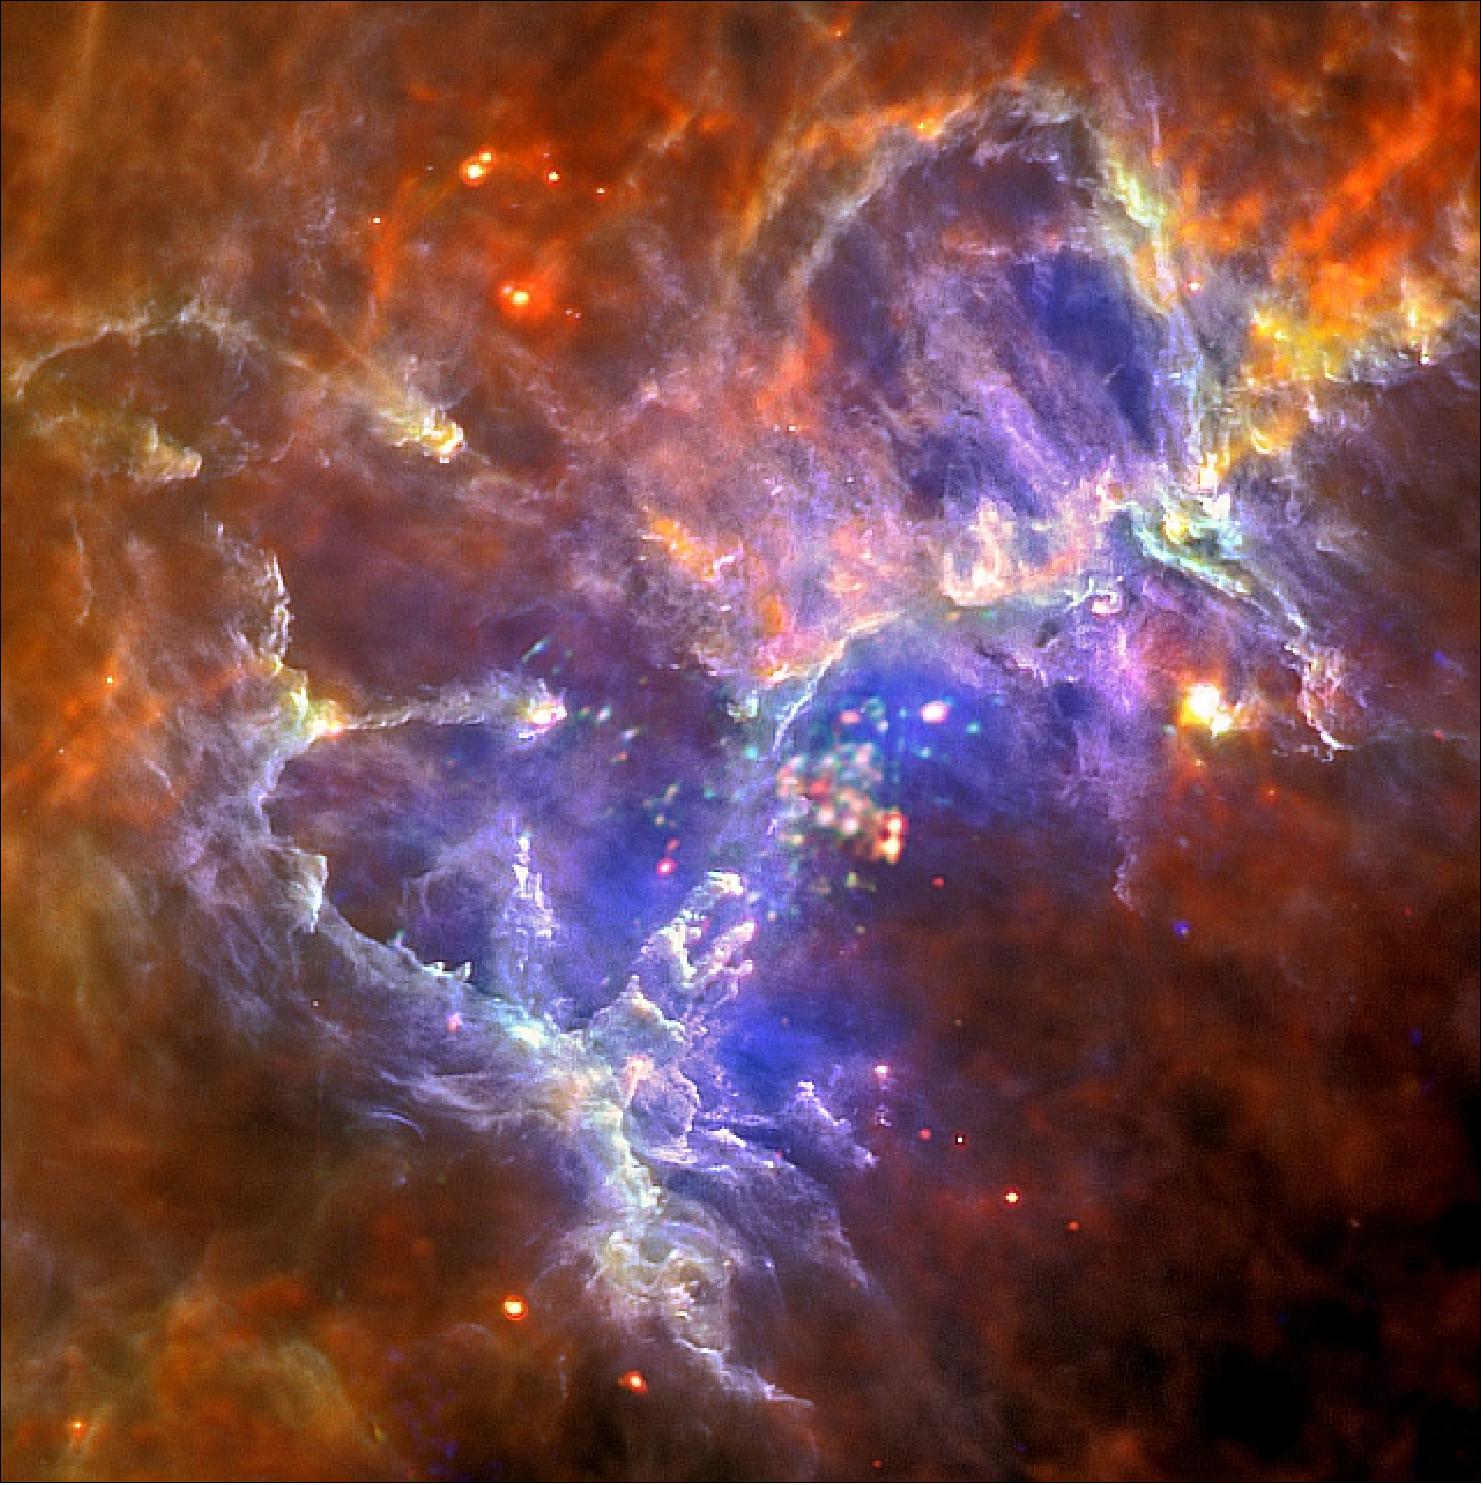 Figure 73: New Herschel and XMM-Newton image observed in far infrared and X-rays of the Eagle Nebula in January 2012 (image credit: far-infrared: ESA/Herschel/PACS/SPIRE/Hill, Motte, HOBYS Key Programme Consortium; X-ray: ESA/XMM-Newton/EPIC/XMM-Newton-SOC/Boulanger, Ref. 104)